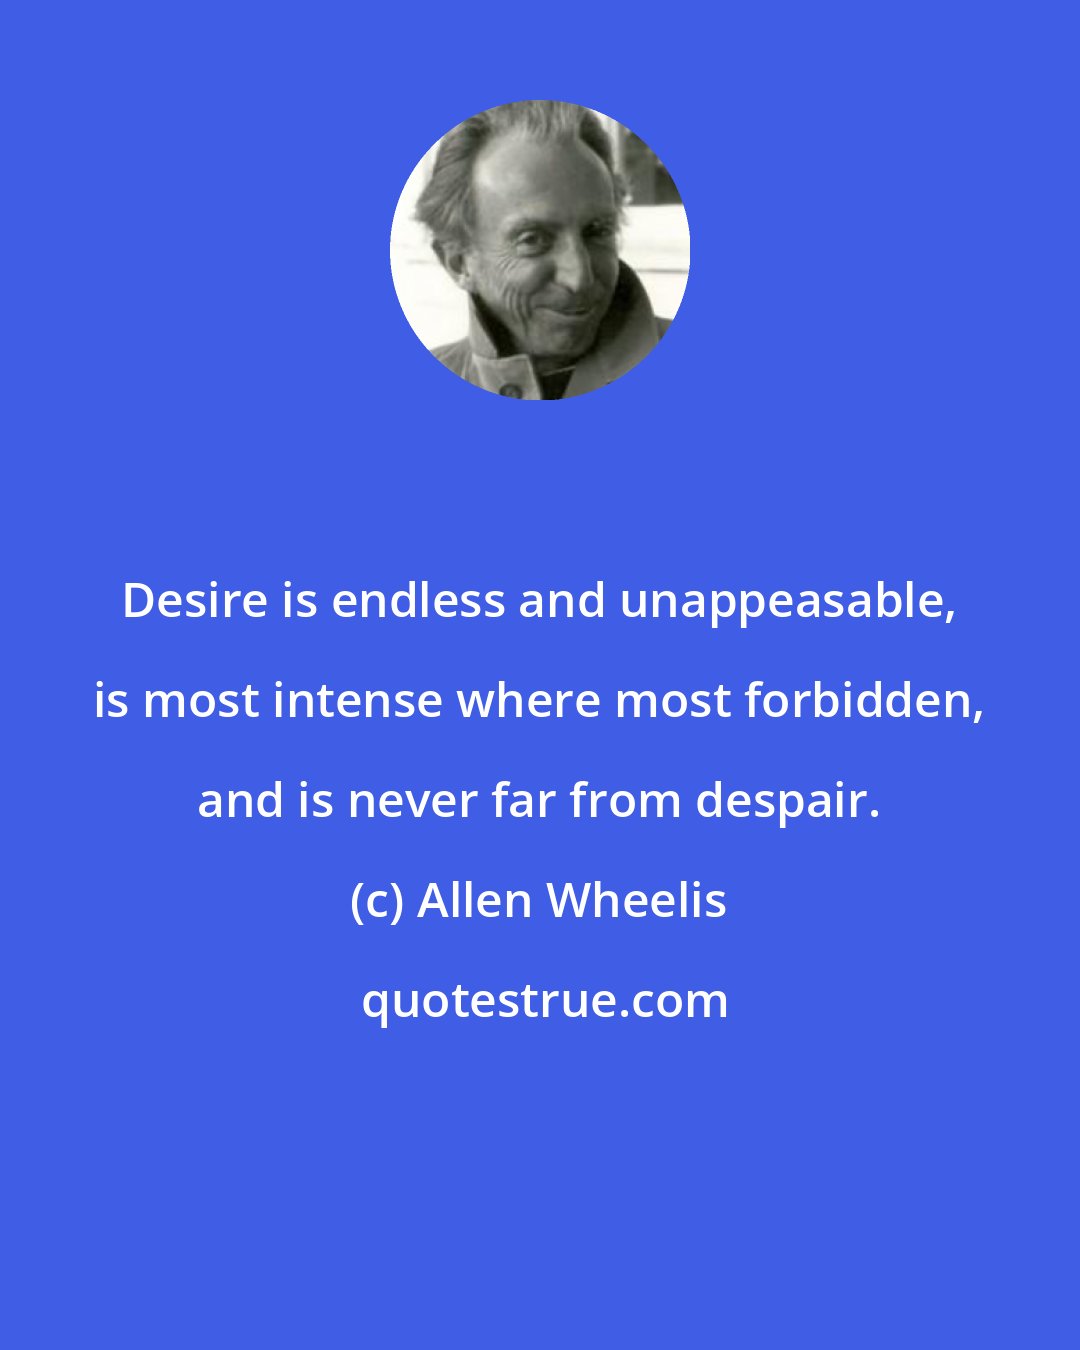 Allen Wheelis: Desire is endless and unappeasable, is most intense where most forbidden, and is never far from despair.